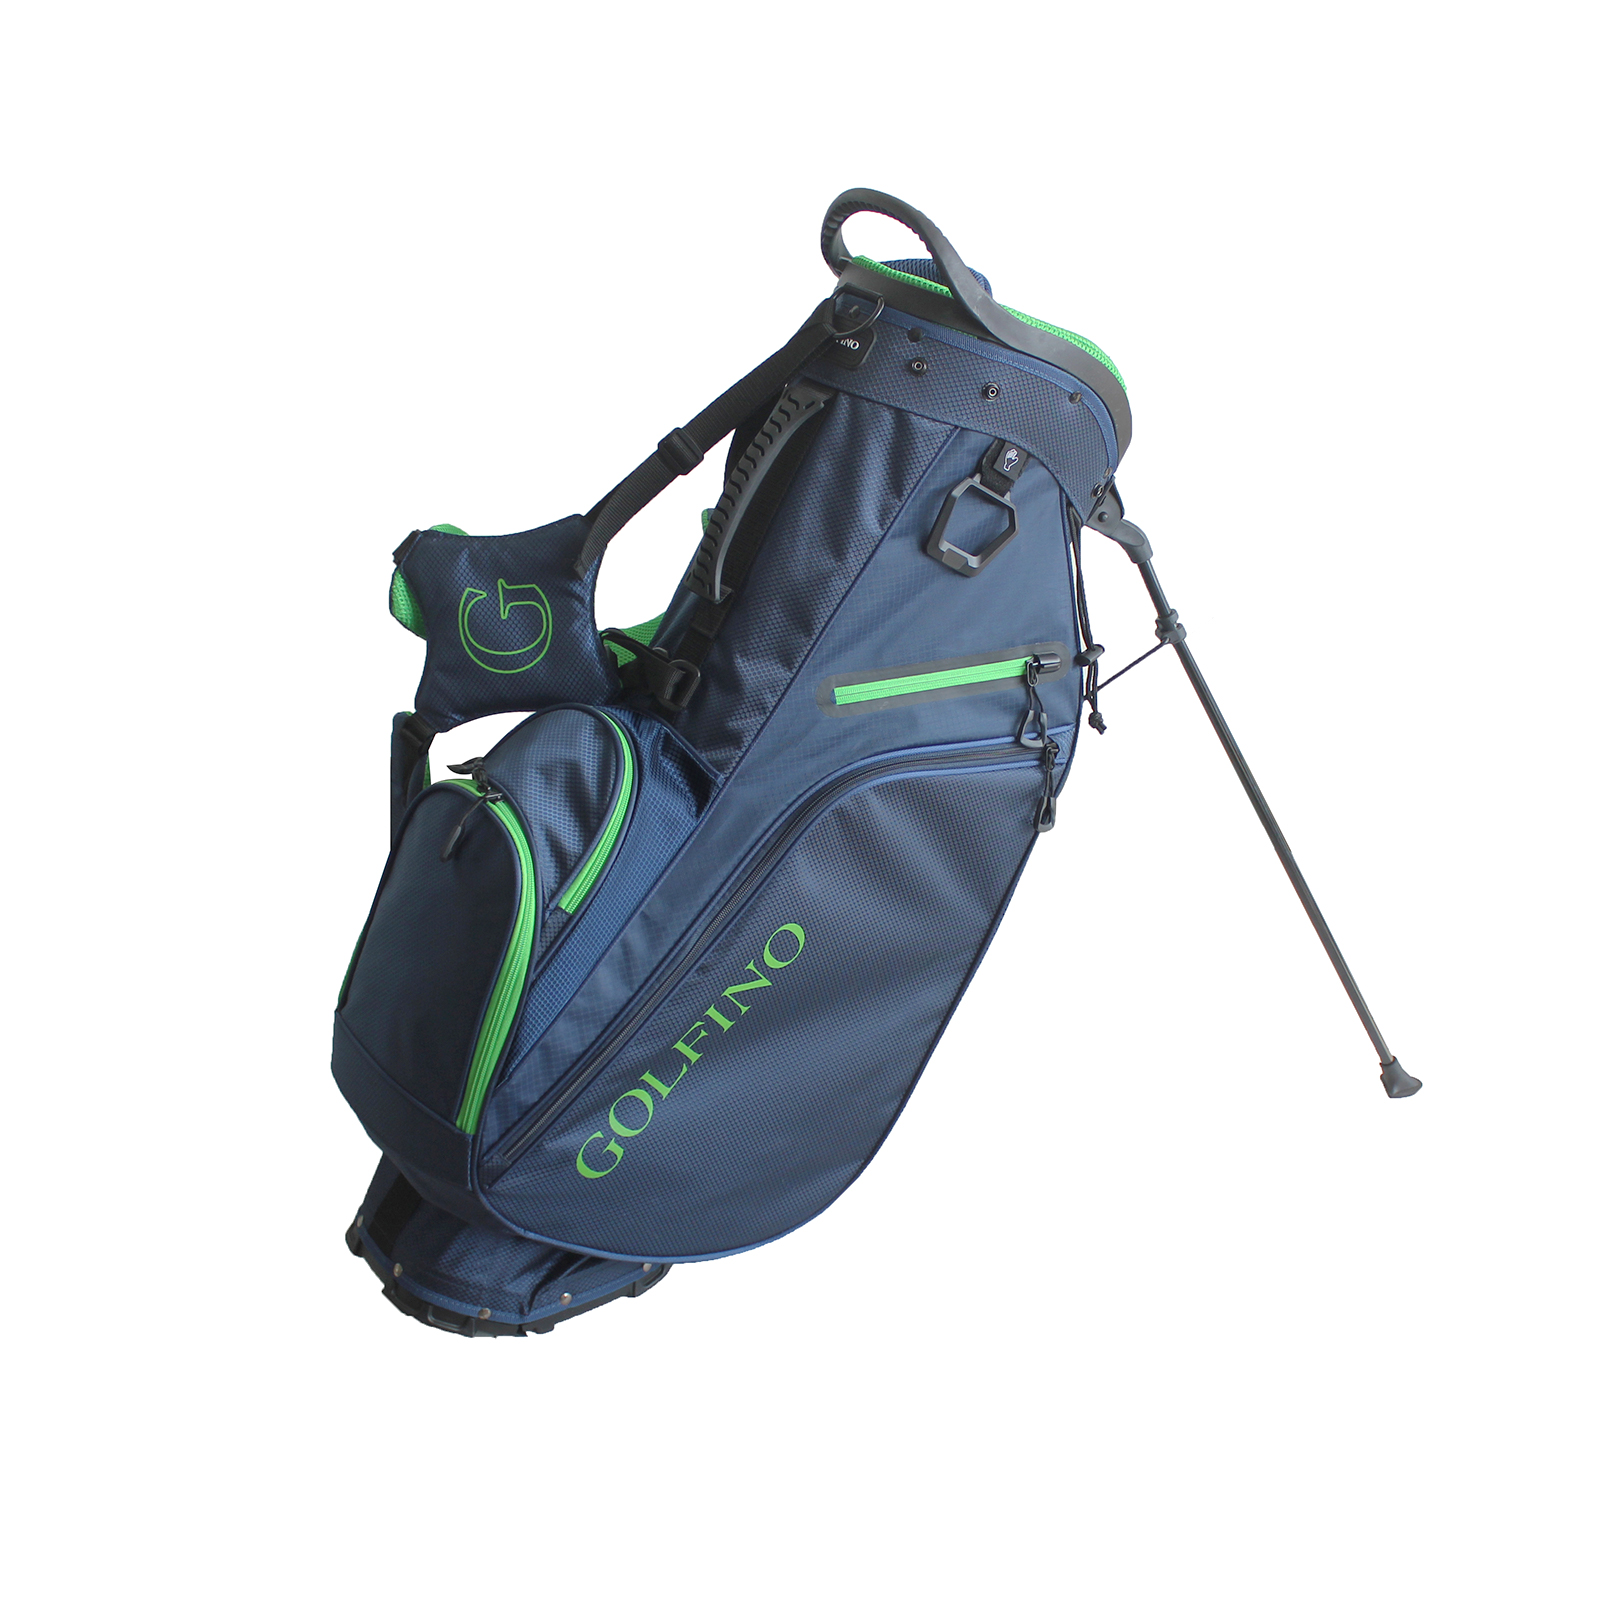 Stand bag with a sporty design